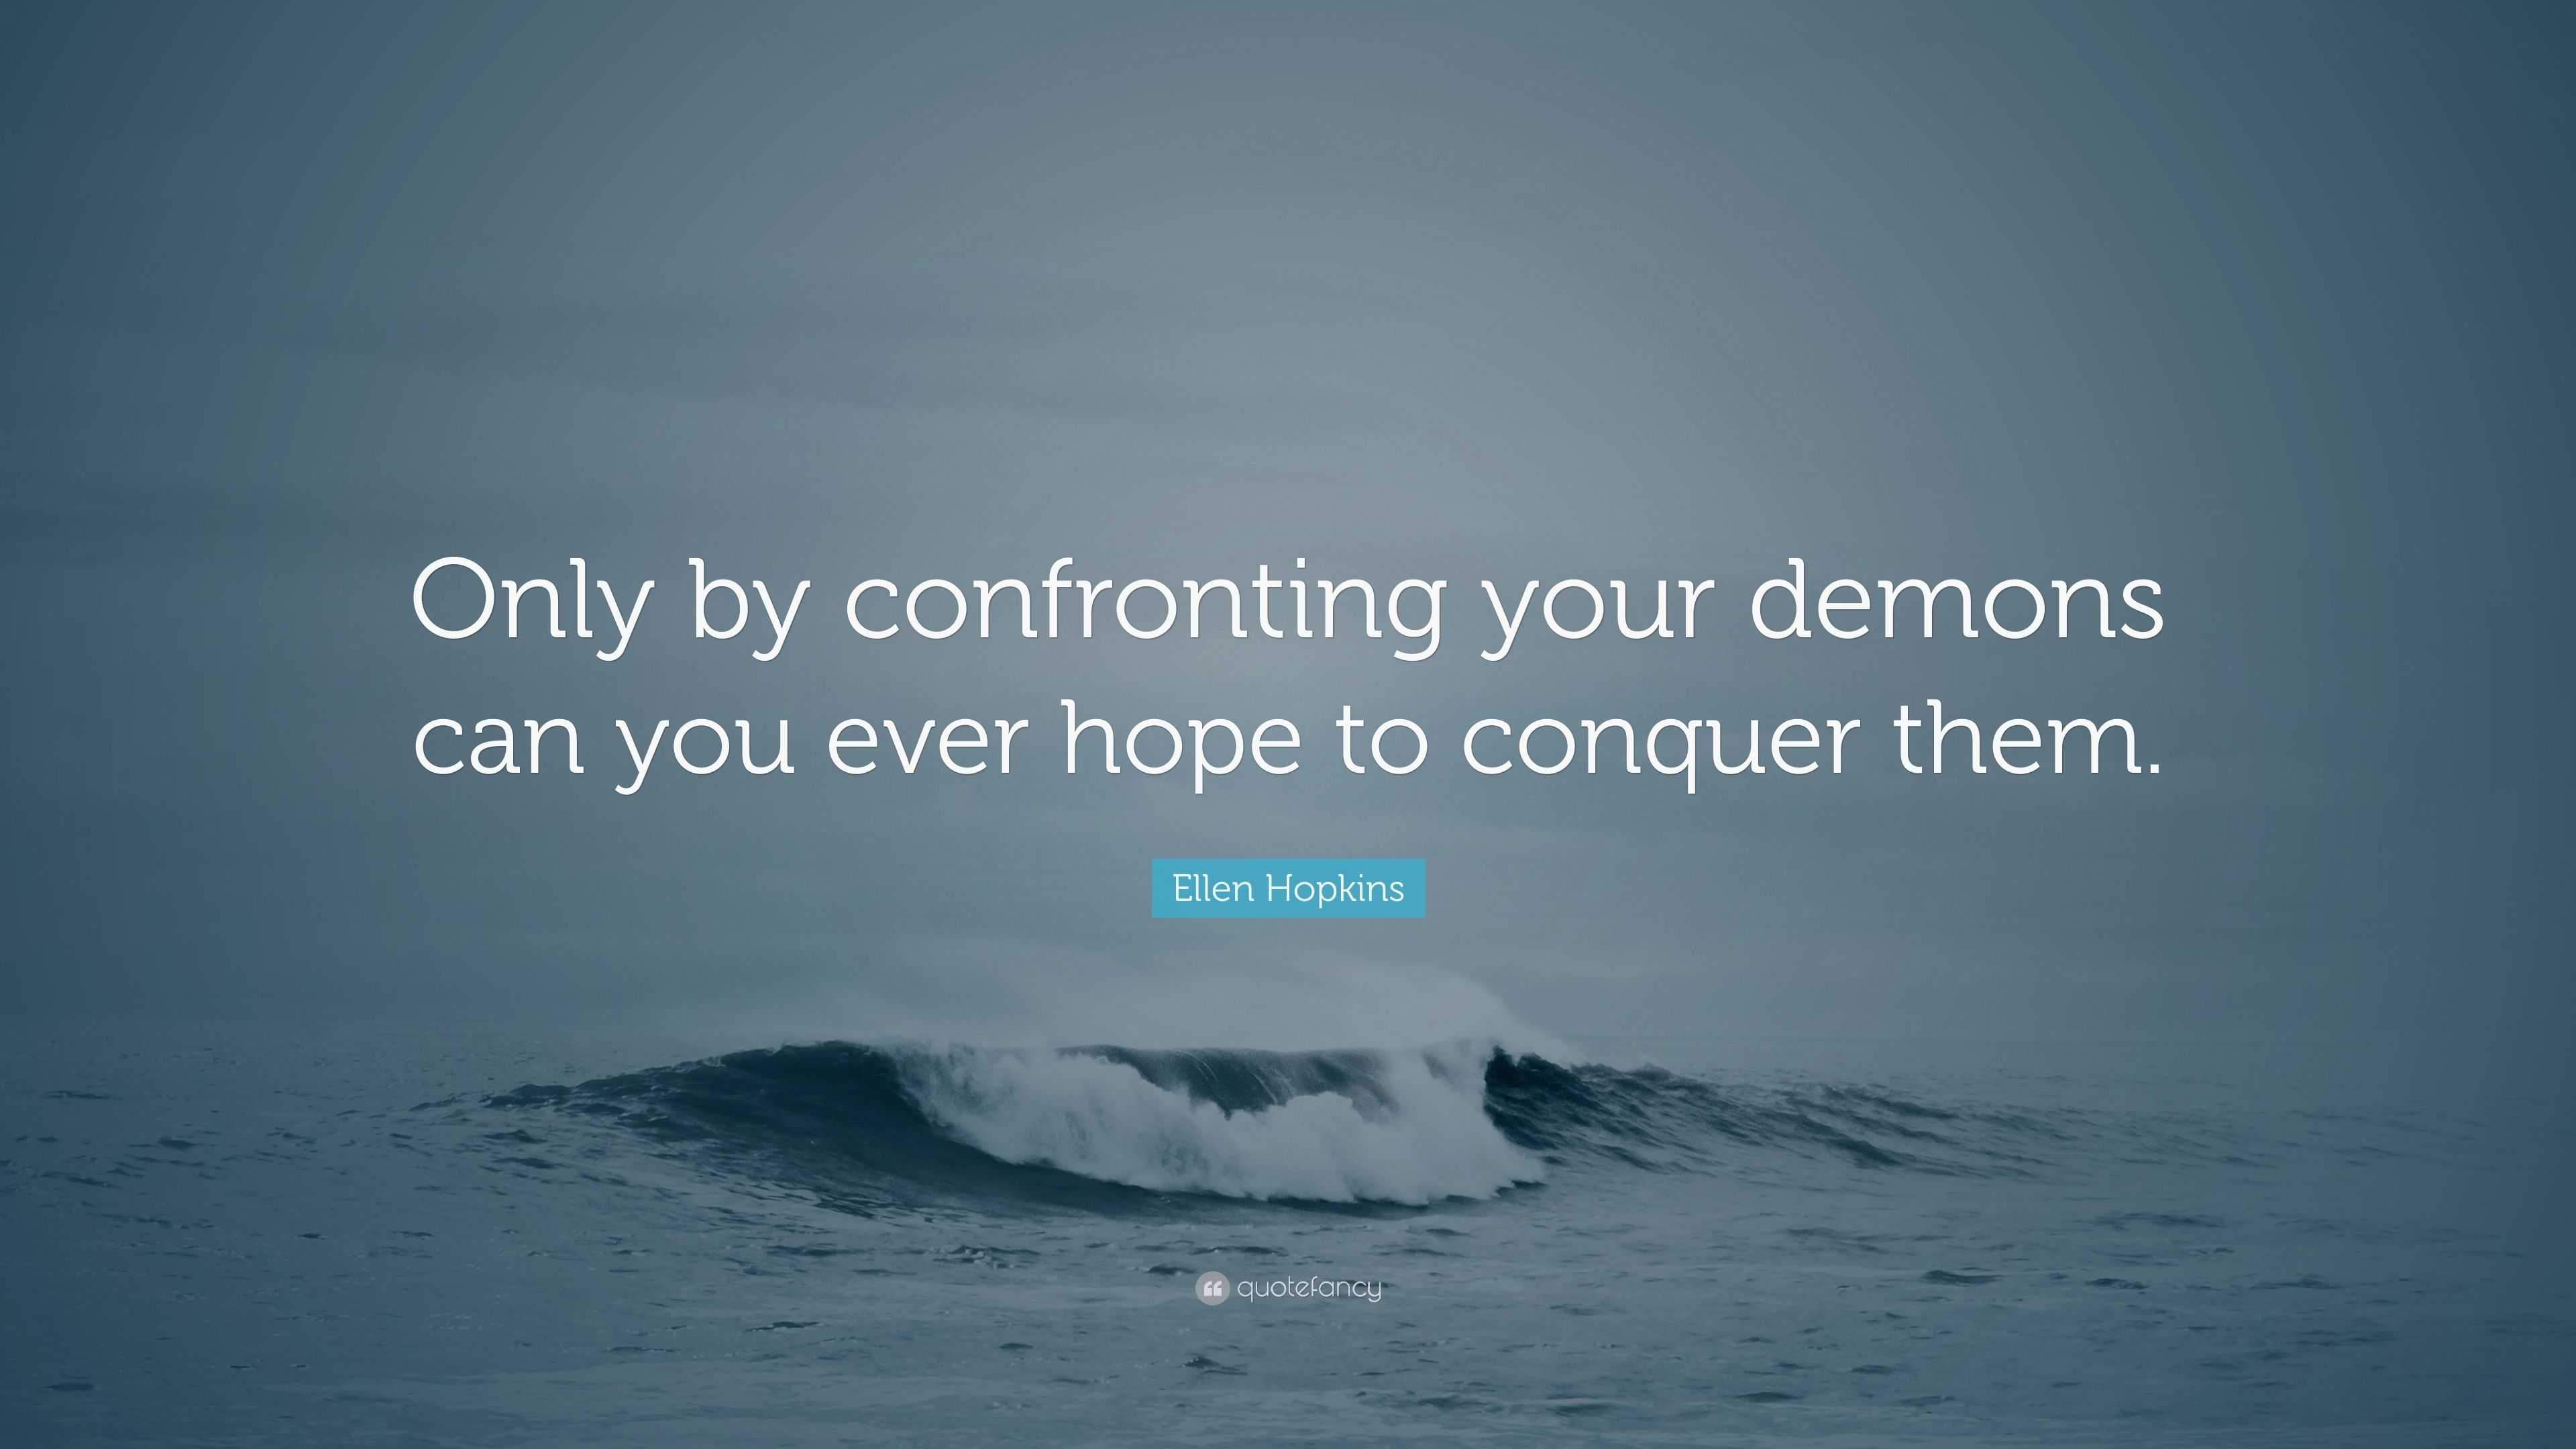 Ellen Hopkins Quote: “Only by confronting your demons can you ever hope ...